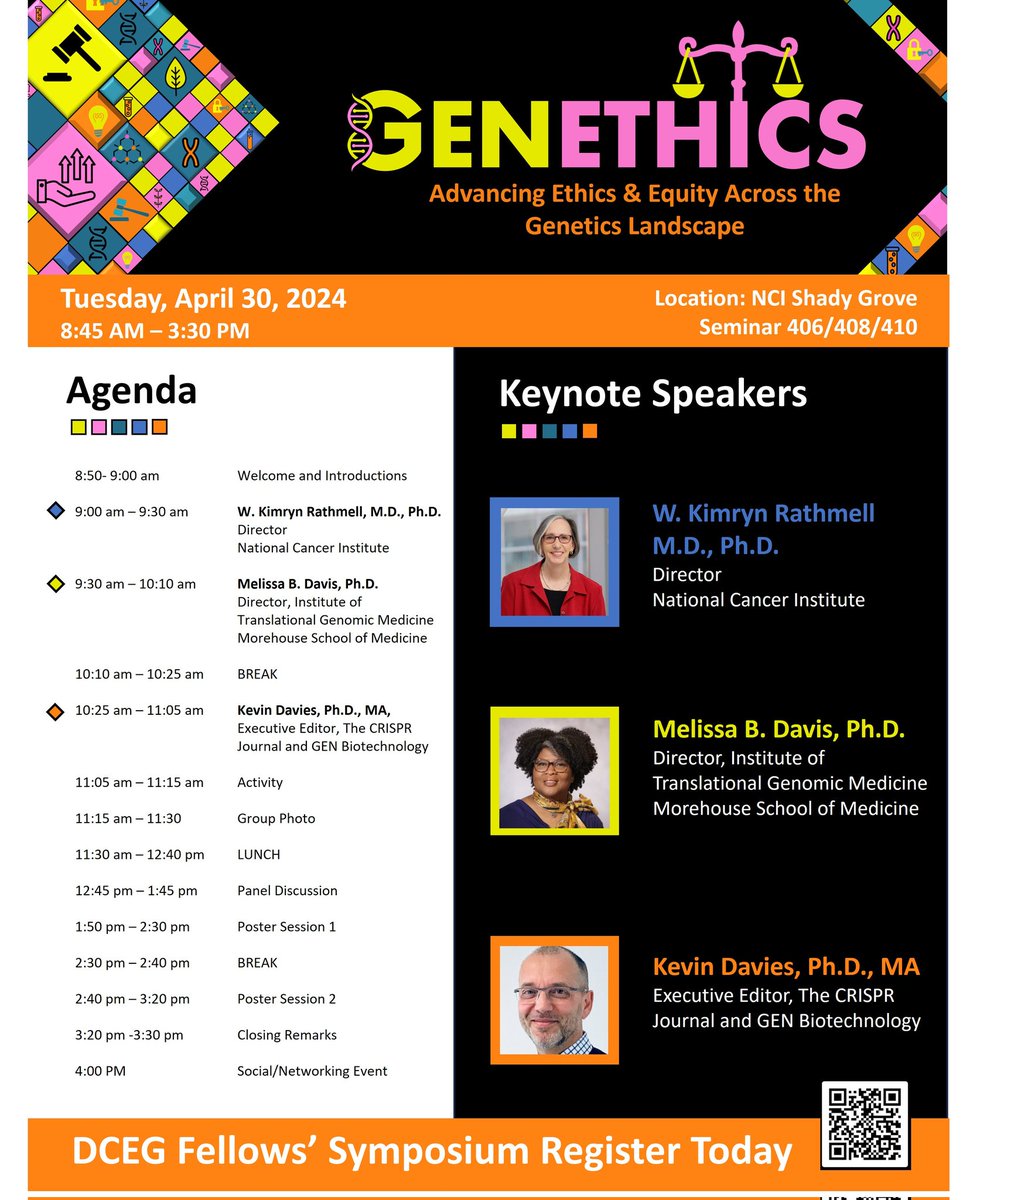 I'm so excited to be on my way to @theNCI tomorrow, to be a keynote speaker for the DCEG Fellows meeting, GENETHICS. (Following the amazing @NCIDirector, Dr W. Kimryn Rathmell, will be tough, though.) Extremely grateful for the opportunity!